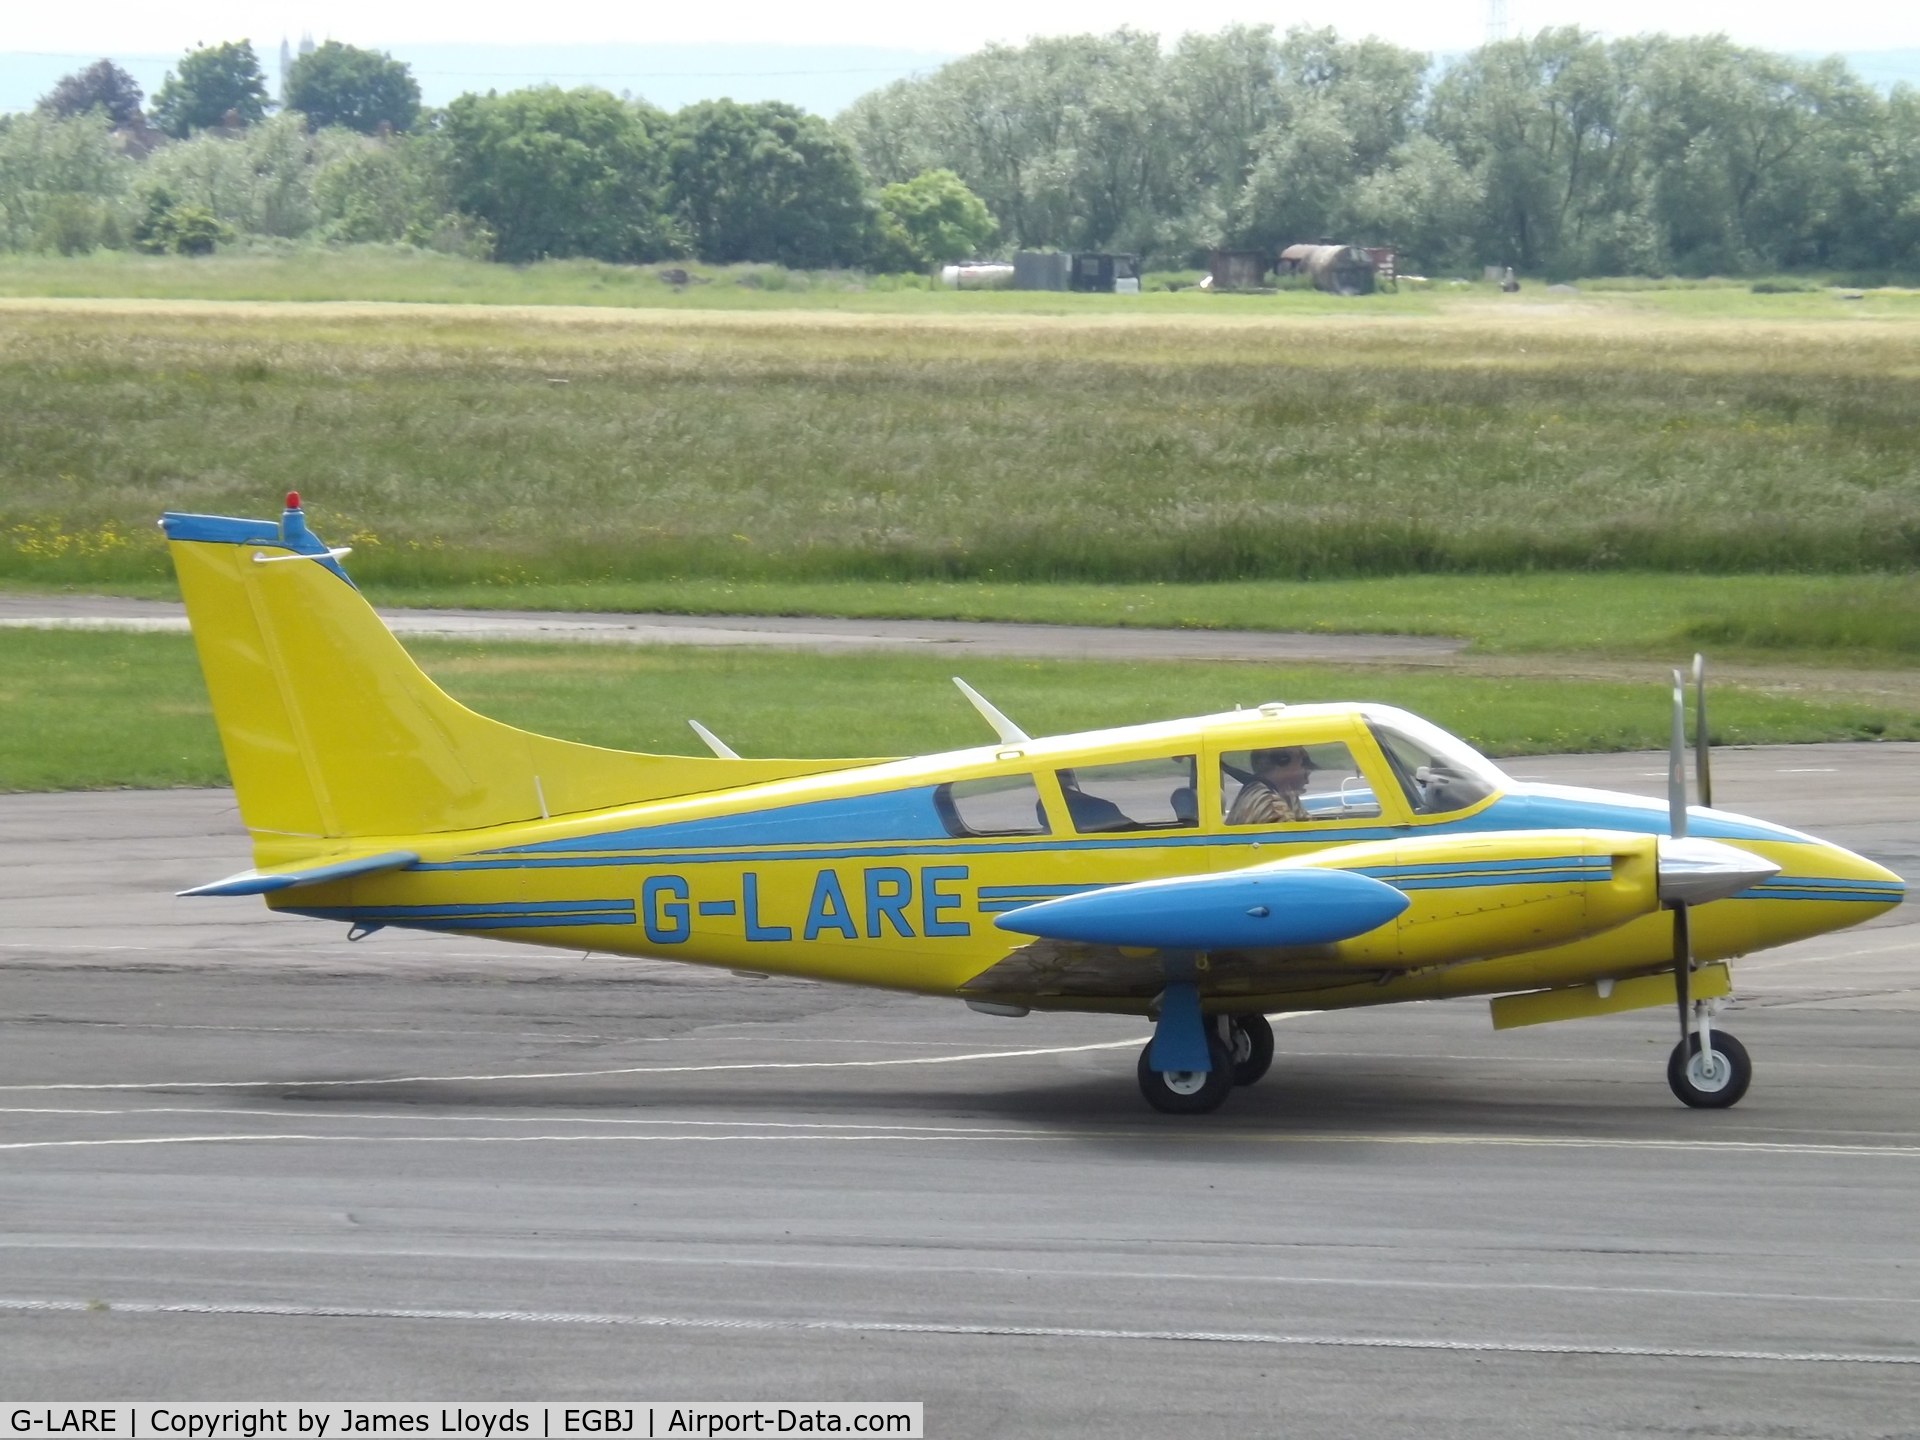 G-LARE, 1970 Piper PA-39 Twin Comanche C/R C/N 39-16, At Gloucestershire Airport.